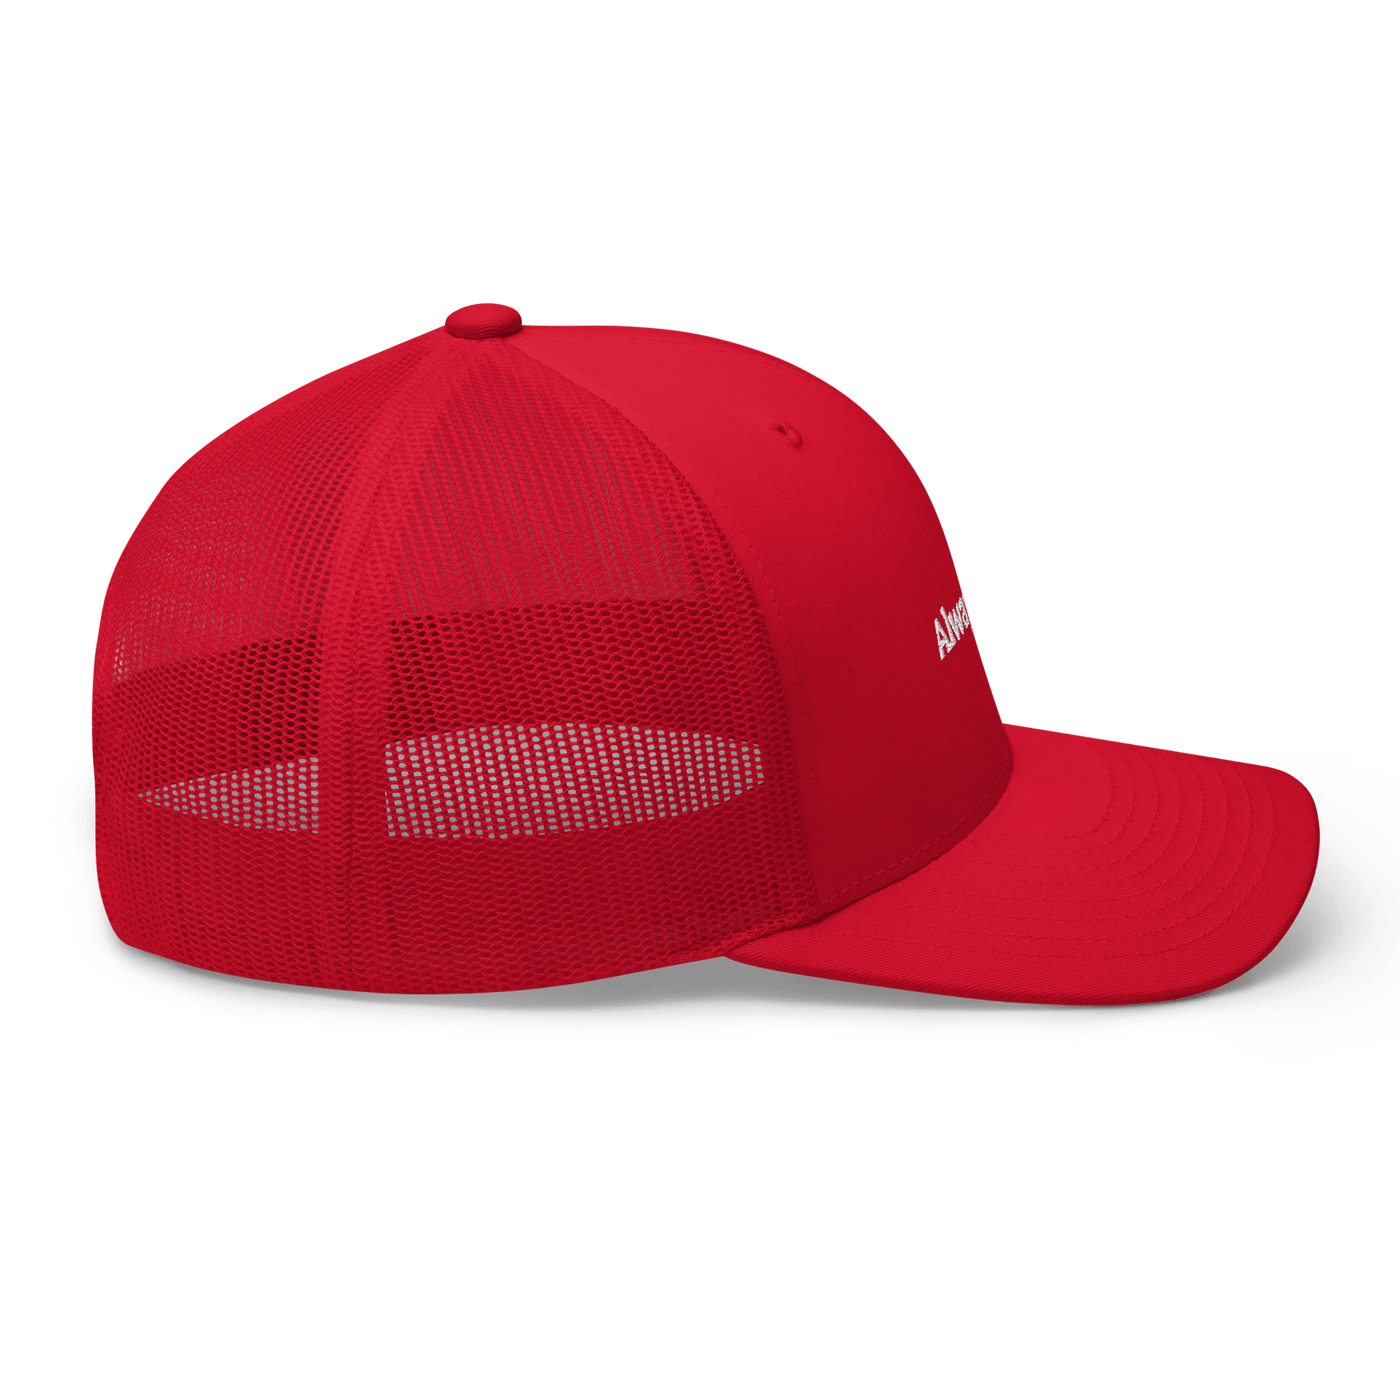 Always Late. Trucker Cap - Red - - Just Another Cap Store